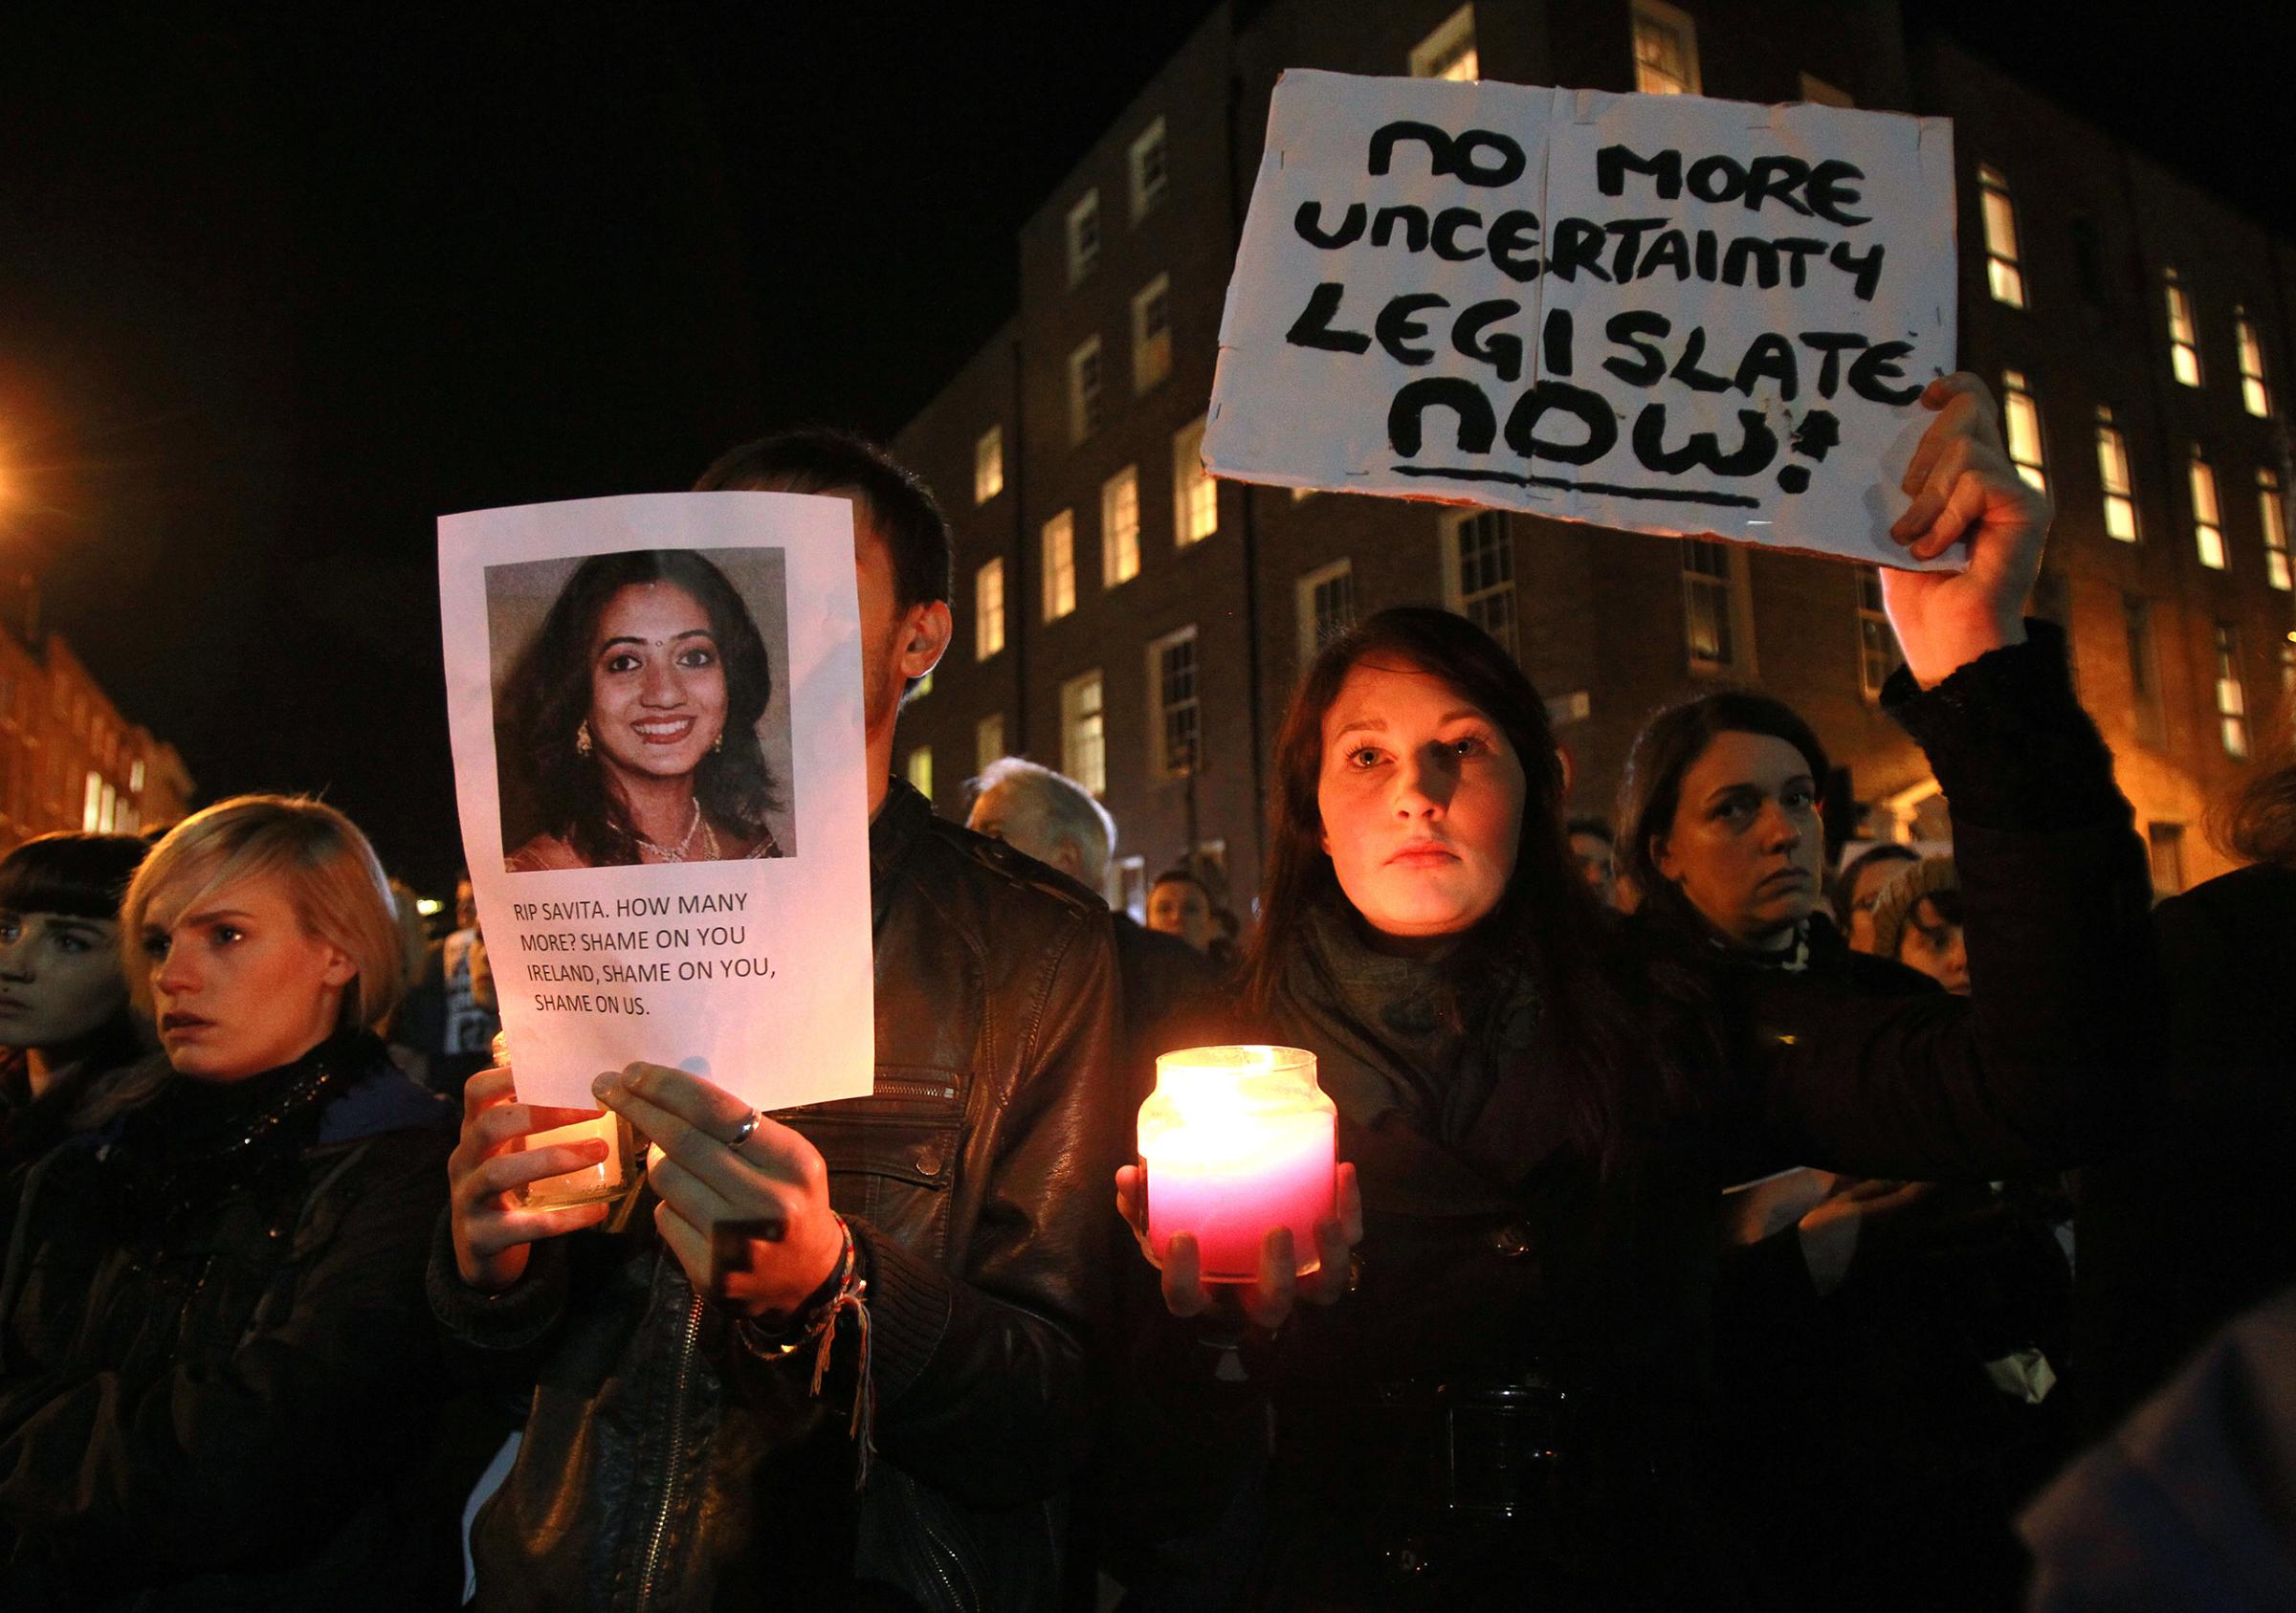 Protestors hold pictures of Savita Halappanavar, an Indian woman who was allegedly refused a pregnancy termination after doctors told her it was a Catholic country, as they gather outside the Parliament building during a demonstration in favor of abortion legislation in Dublin on Nov. 14, 2012. Halappanavar, who was 17 weeks pregnant, repeatedly asked the hospital to terminate her pregnancy because she had severe back pain and was miscarrying, her family said.